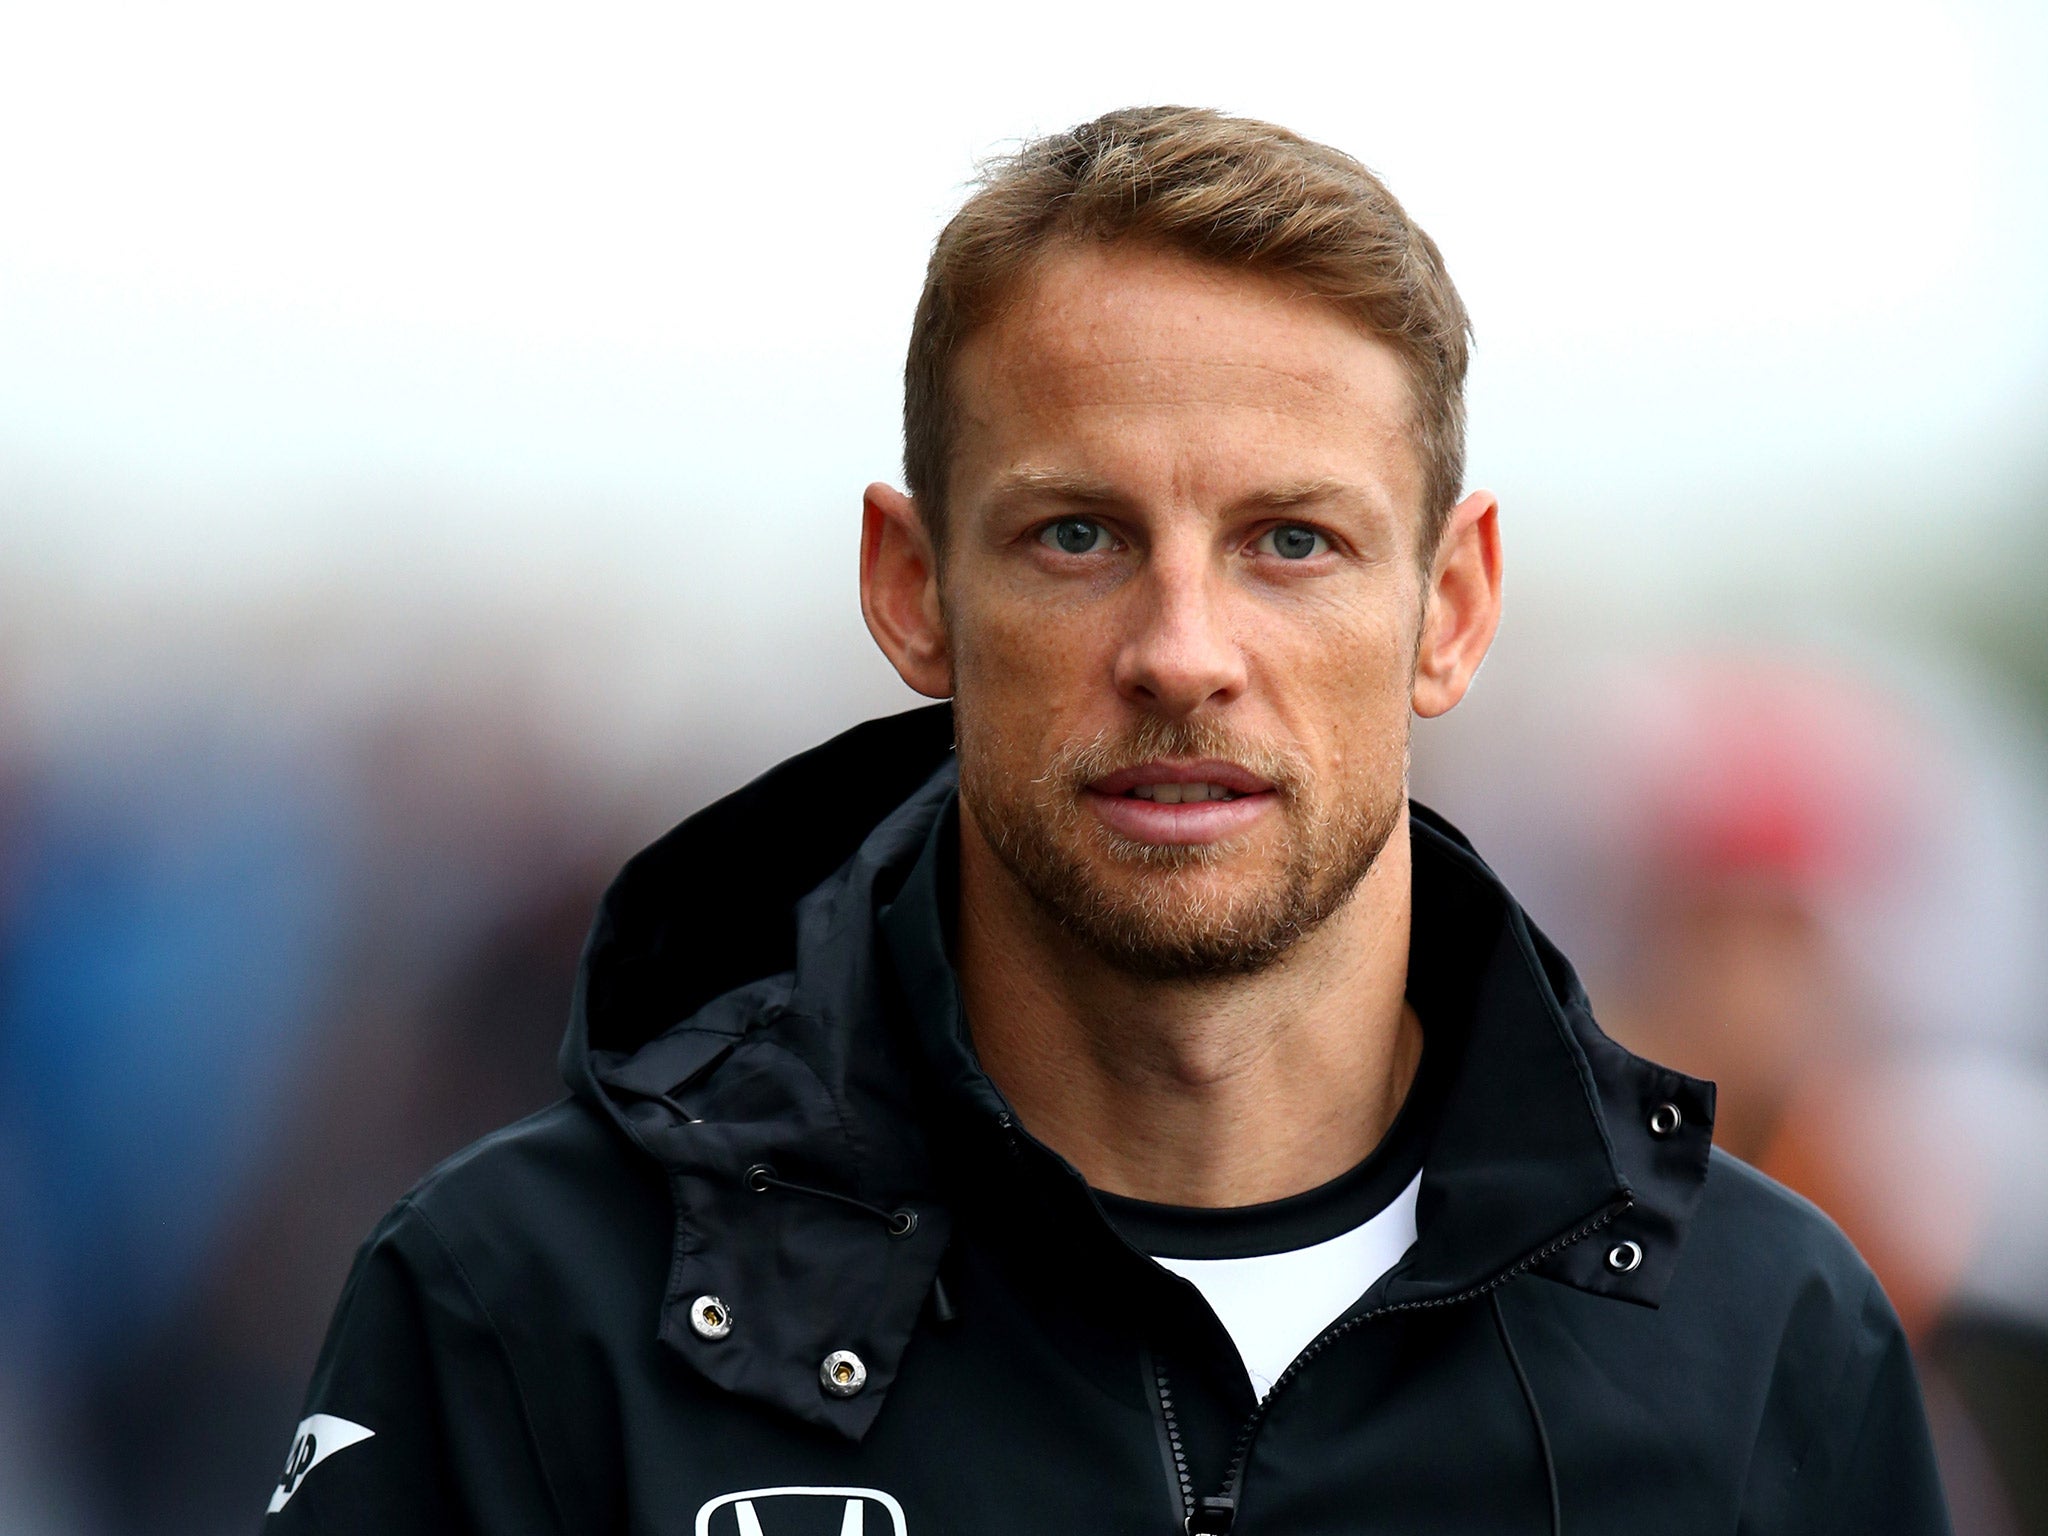 The British driver believes the team is ready to bounce back after a difficult year